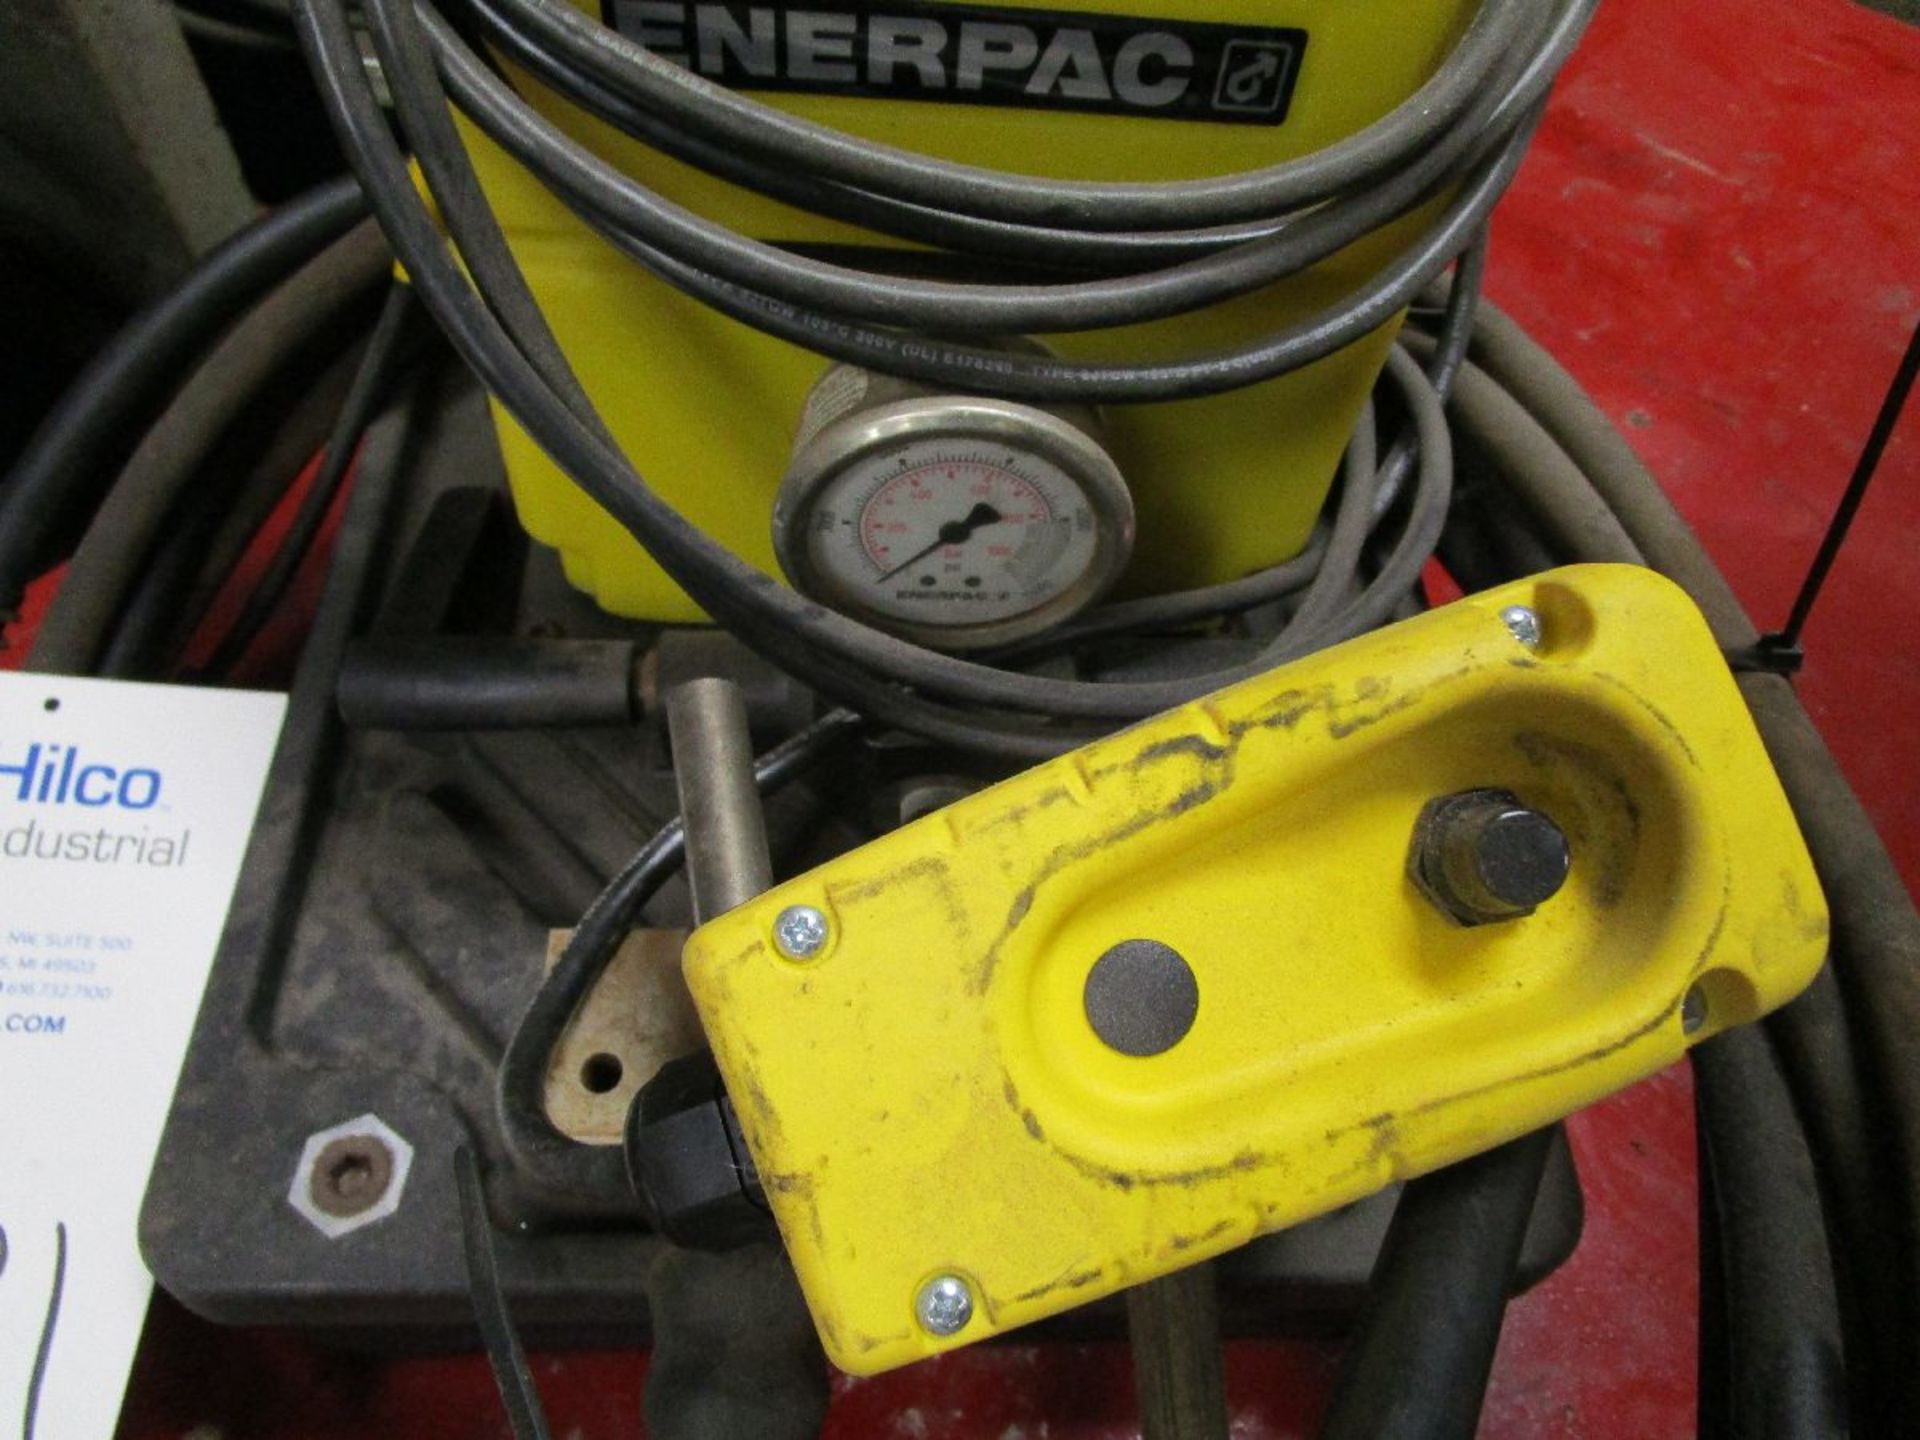 Enerpac Model PUJ12018 Hydraulic Portable Electric Pump - Image 2 of 3